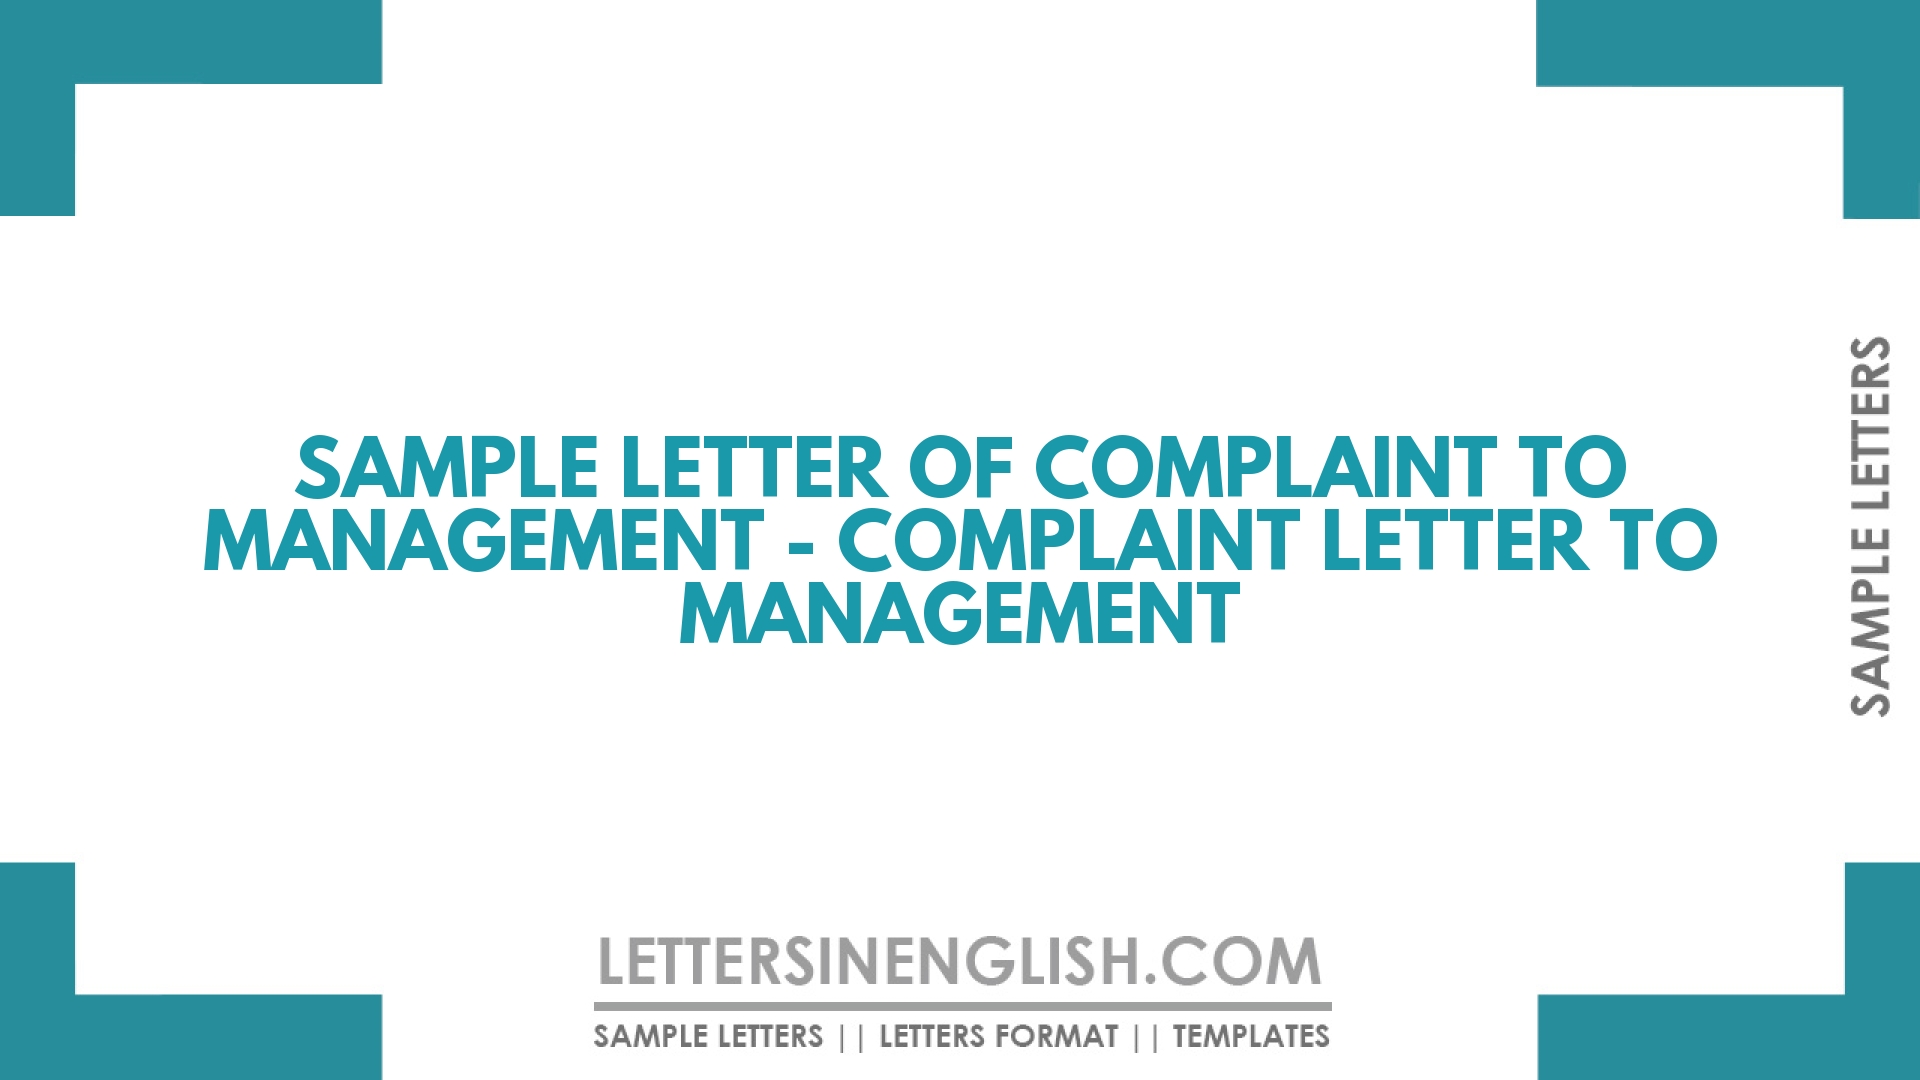 Sample Letter Of Complaint To Management – Complaint Letter To Management